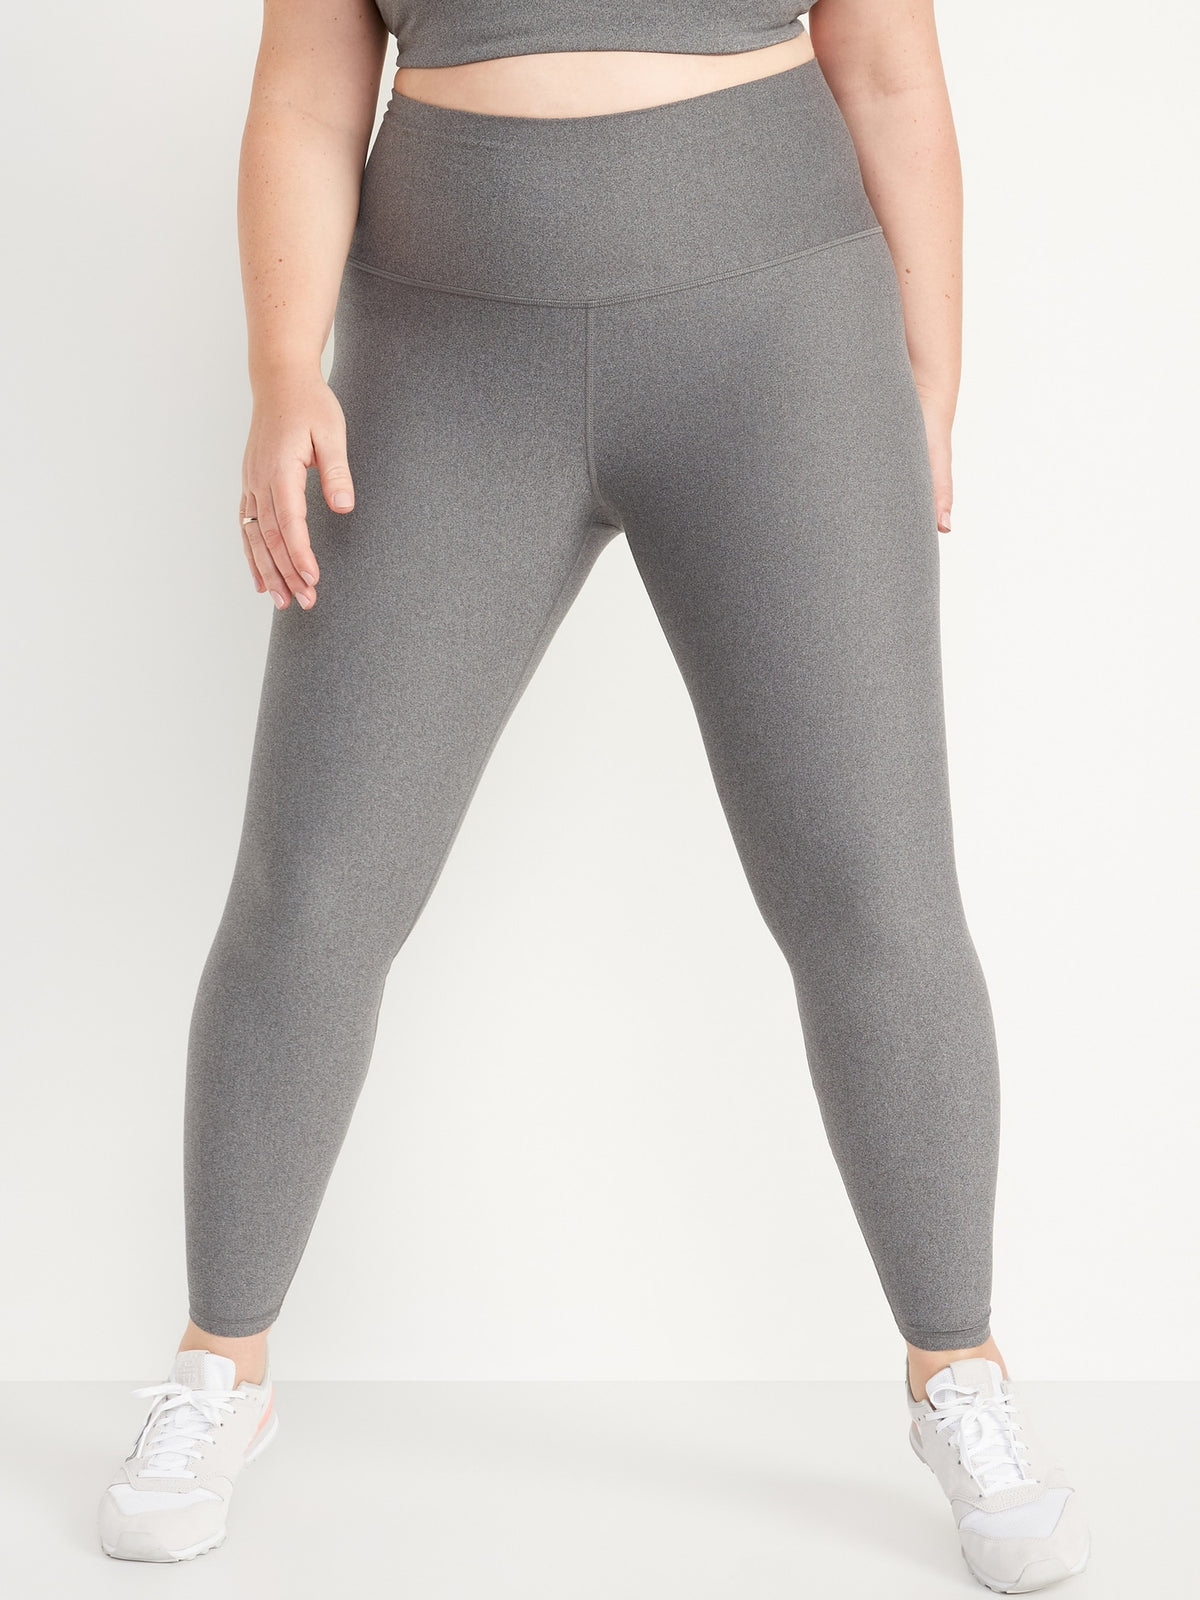 Old Navy + High-Waisted PowerSoft Side-Pocket Crop Leggings